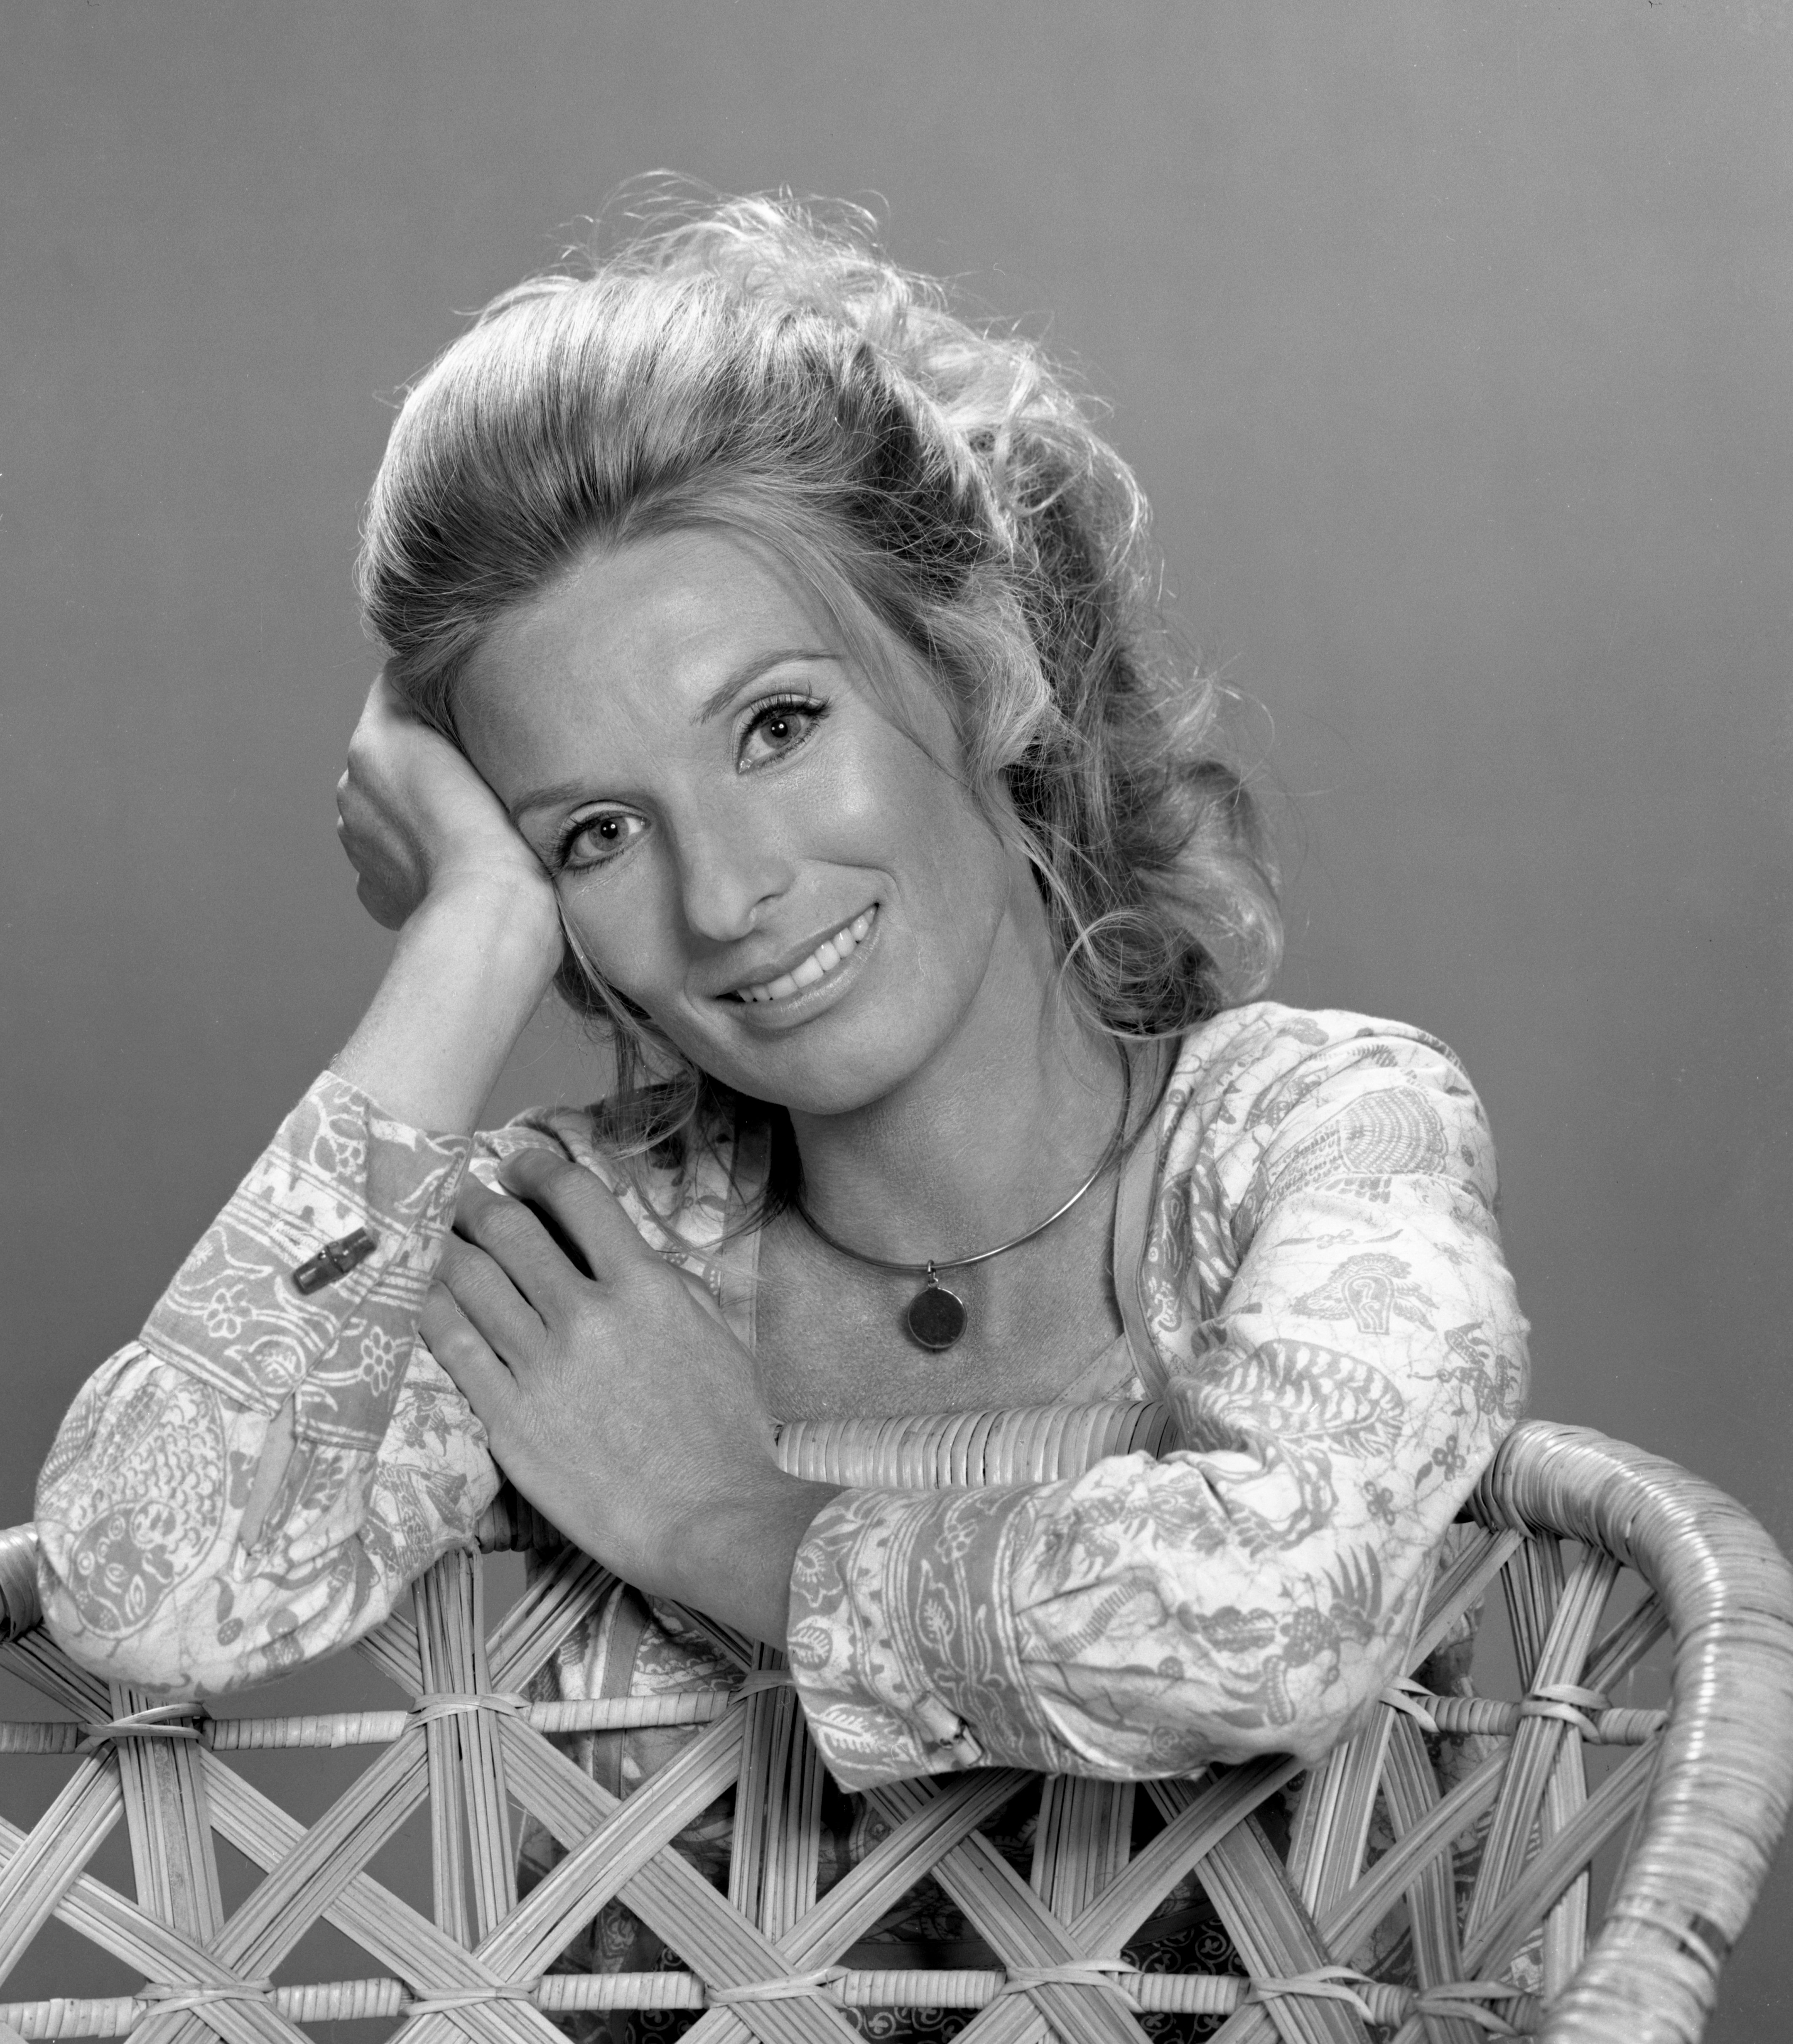 Cloris Leachman as Phyllis Lindstrom on the comedy television series "The Mary Tyler Moore Show," on June 18, 1970 in Los Angeles, California. / Source: Getty Images